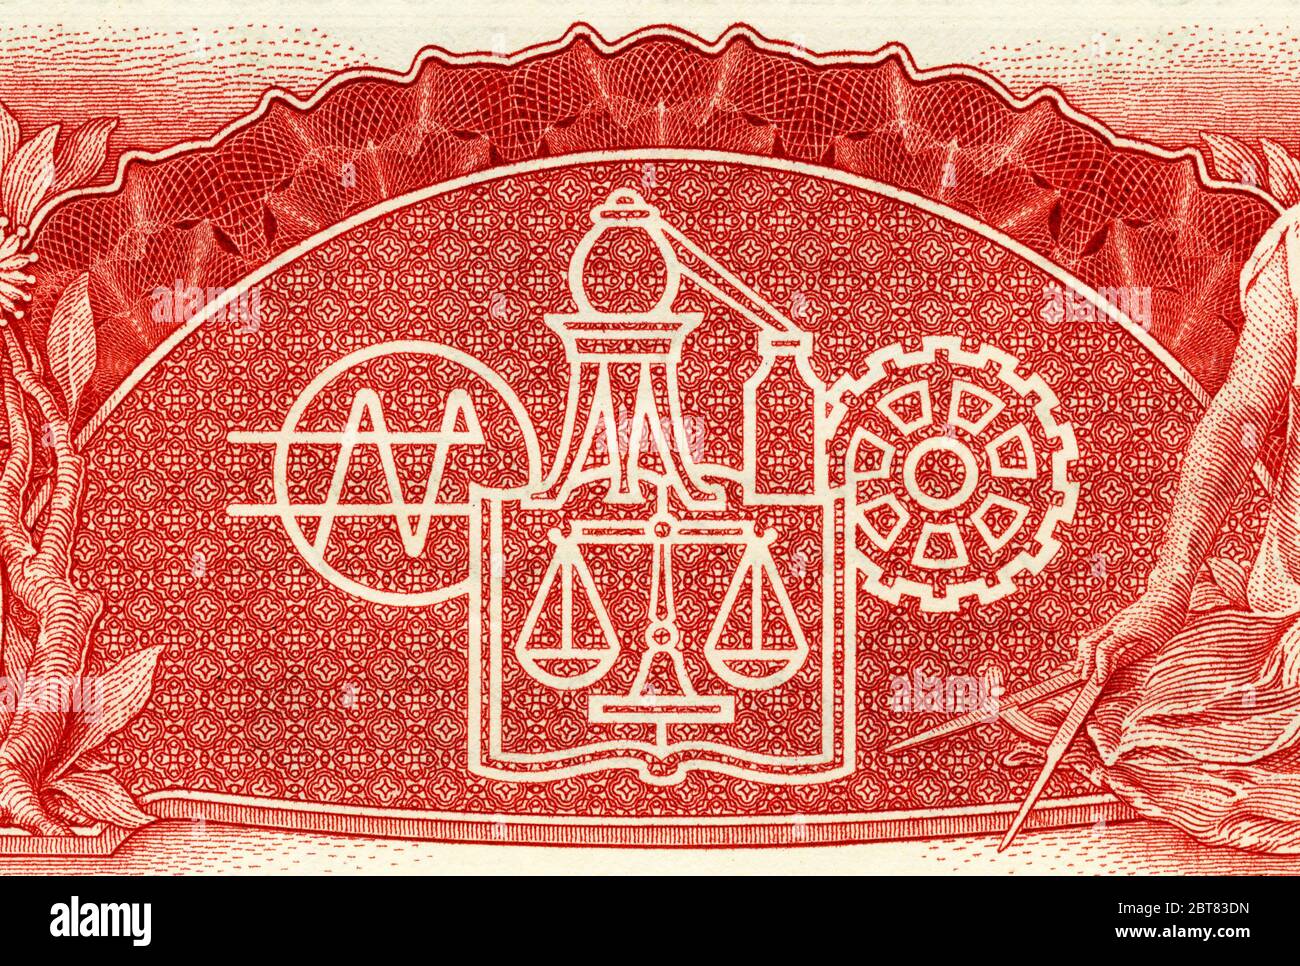 Reverse of an Australian 10 pound bank note featuring the concepts of justice and technology, issued between 1954 and 1959 Stock Photo